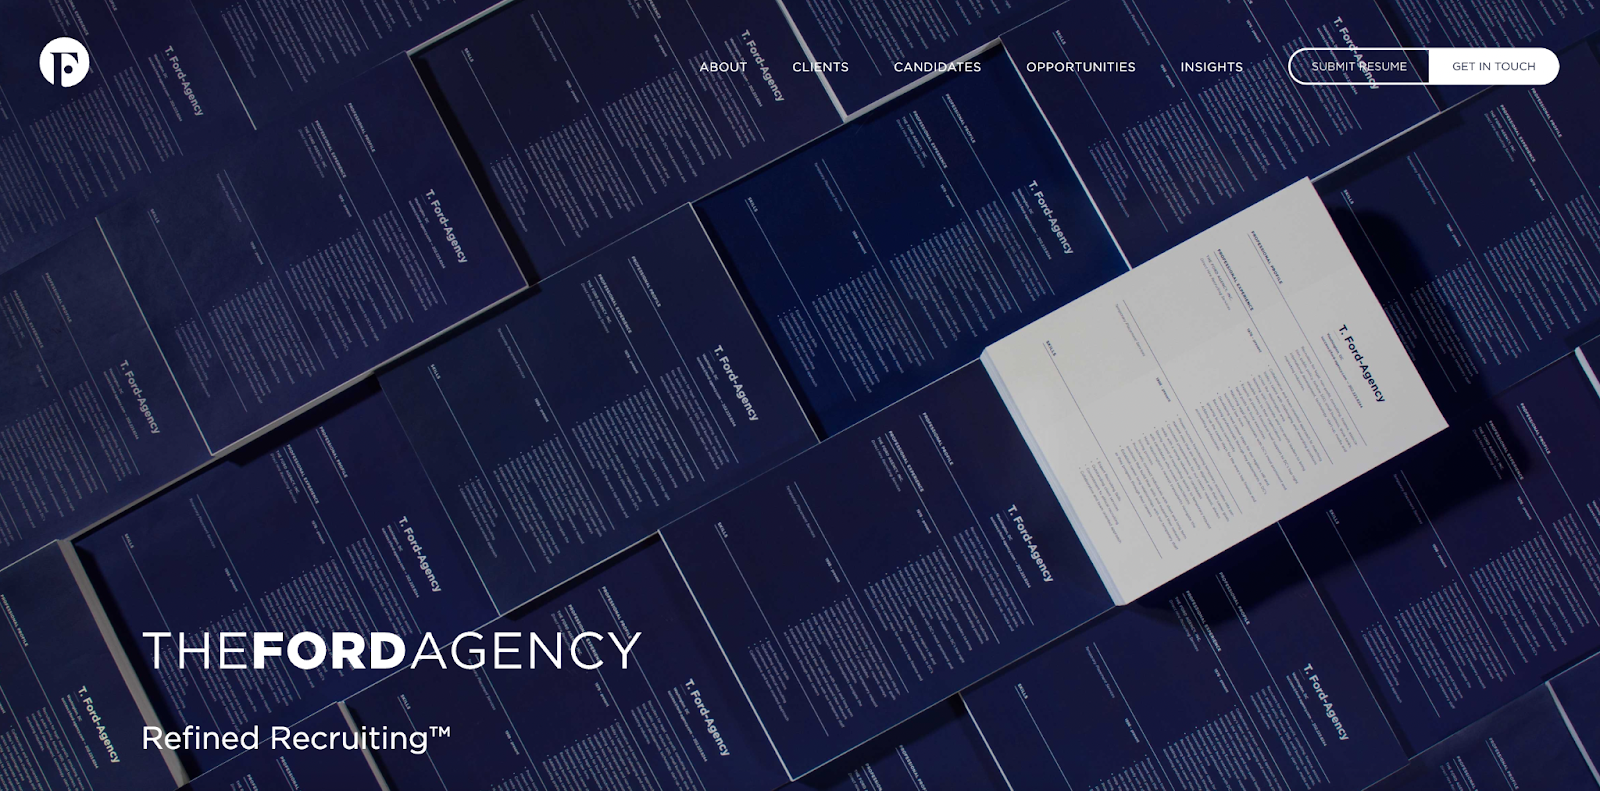 The website homepage for The Ford Agency, a recruitment firm.